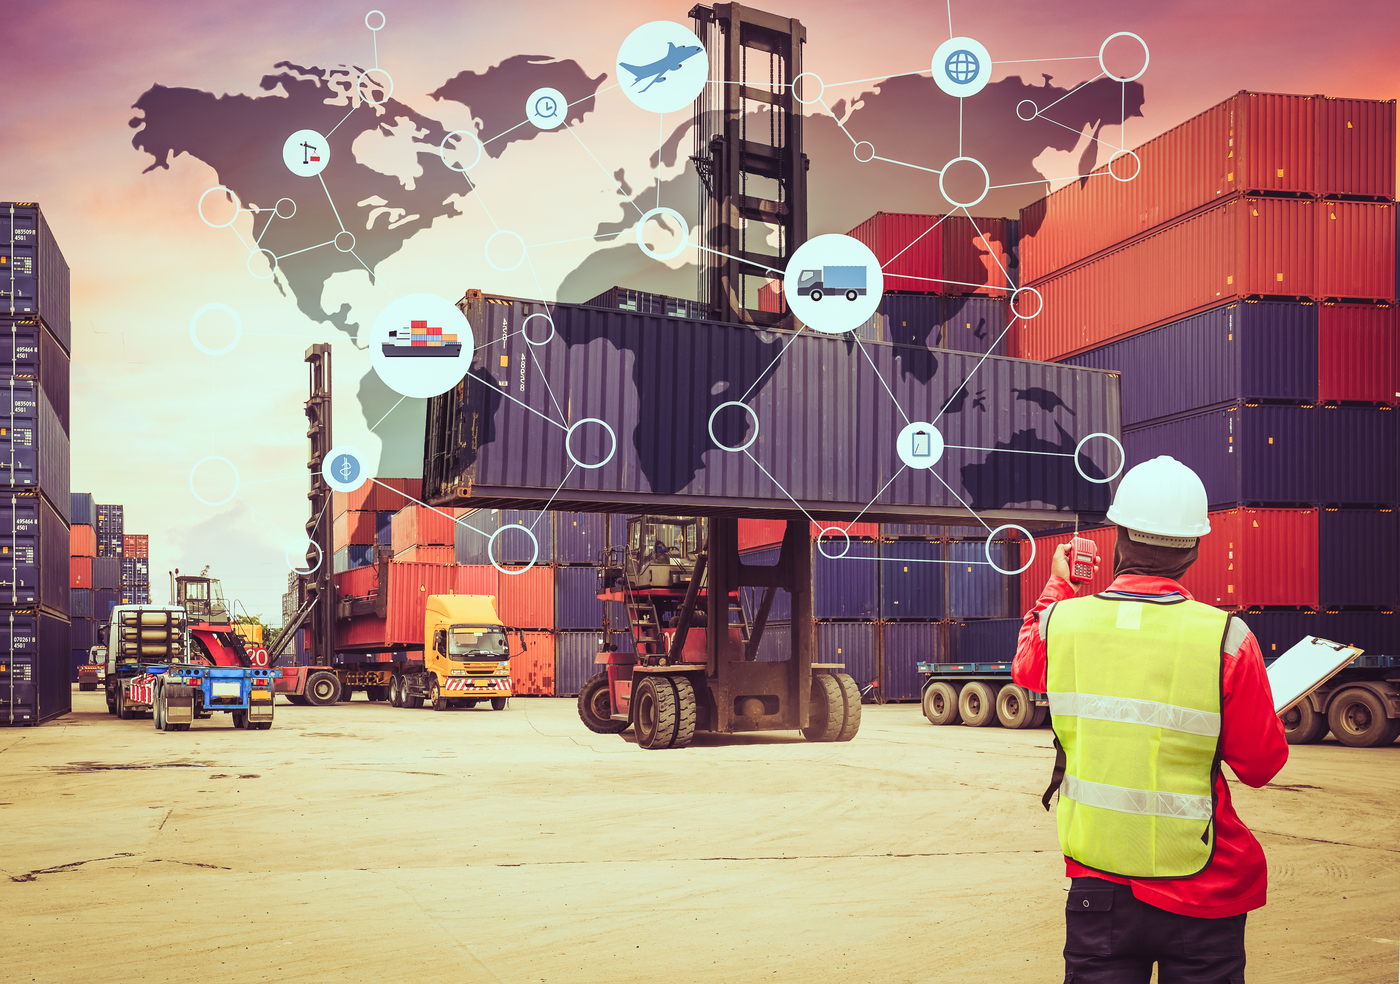 Industry groups calling for acceleration of digitalization of ports - Maritime Fairtrade